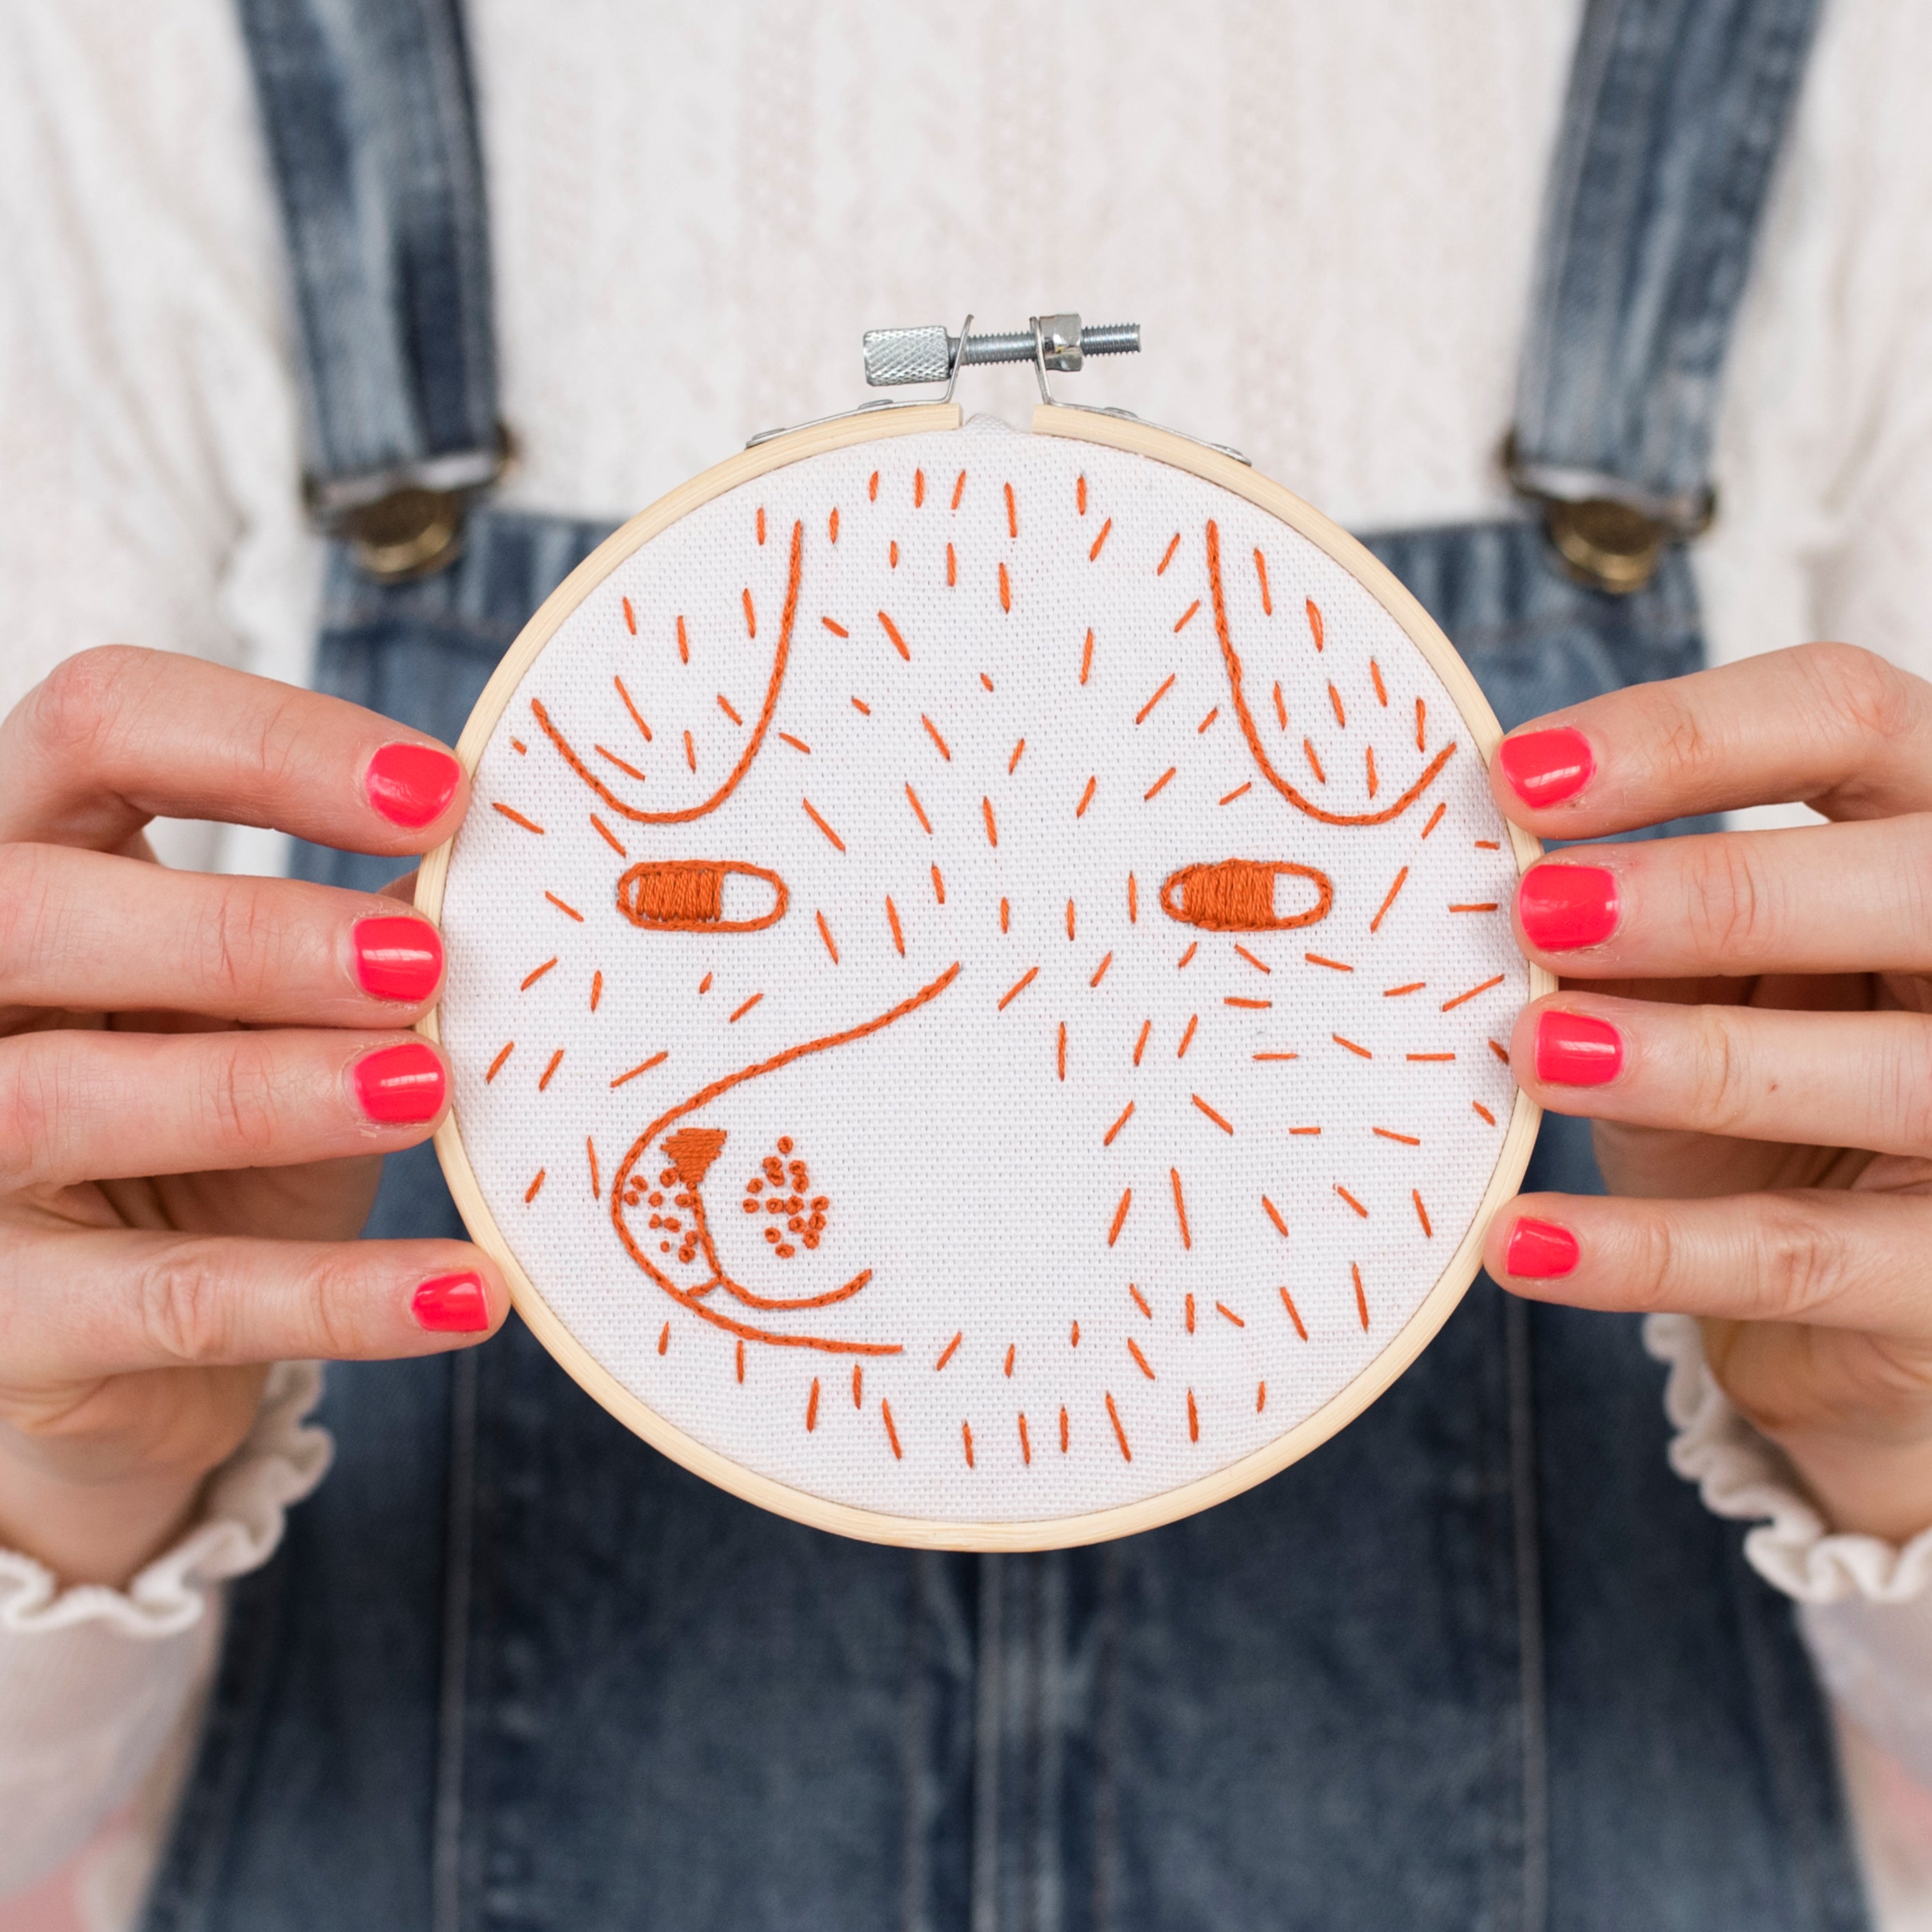 A lady in a white lace top and blue denim dungarees with painted orange nails holds an embroidery hoop in front of her. The hoop shows a pattern of a dog in orange string stitched onto the material.